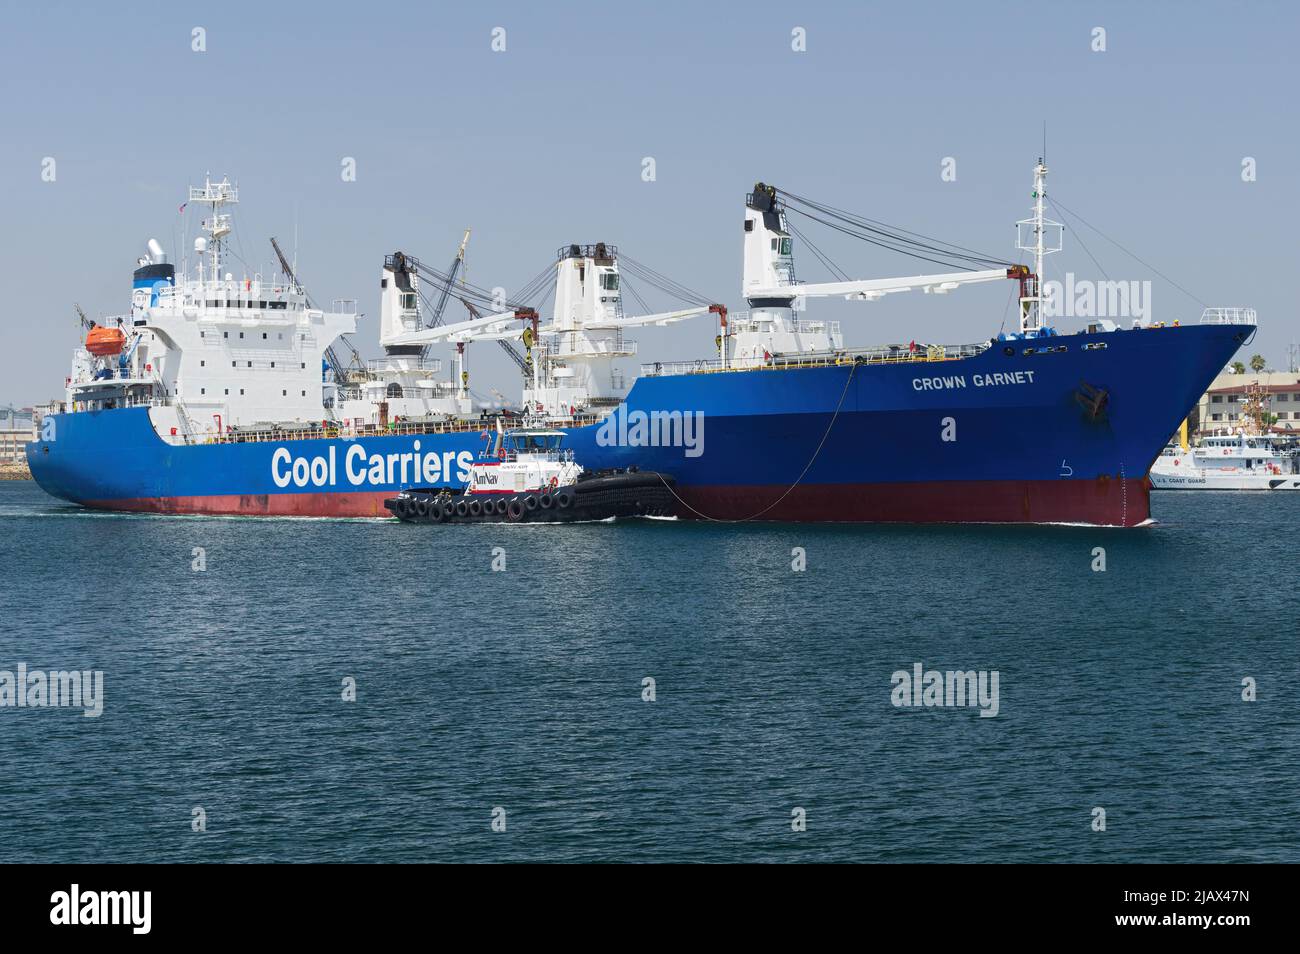 Port of Los Angeles, California, USA - April 27, 2022: image of refrigerated cargo ship Crown Garnet in transit on a sunny day with blue sky. Stock Photo